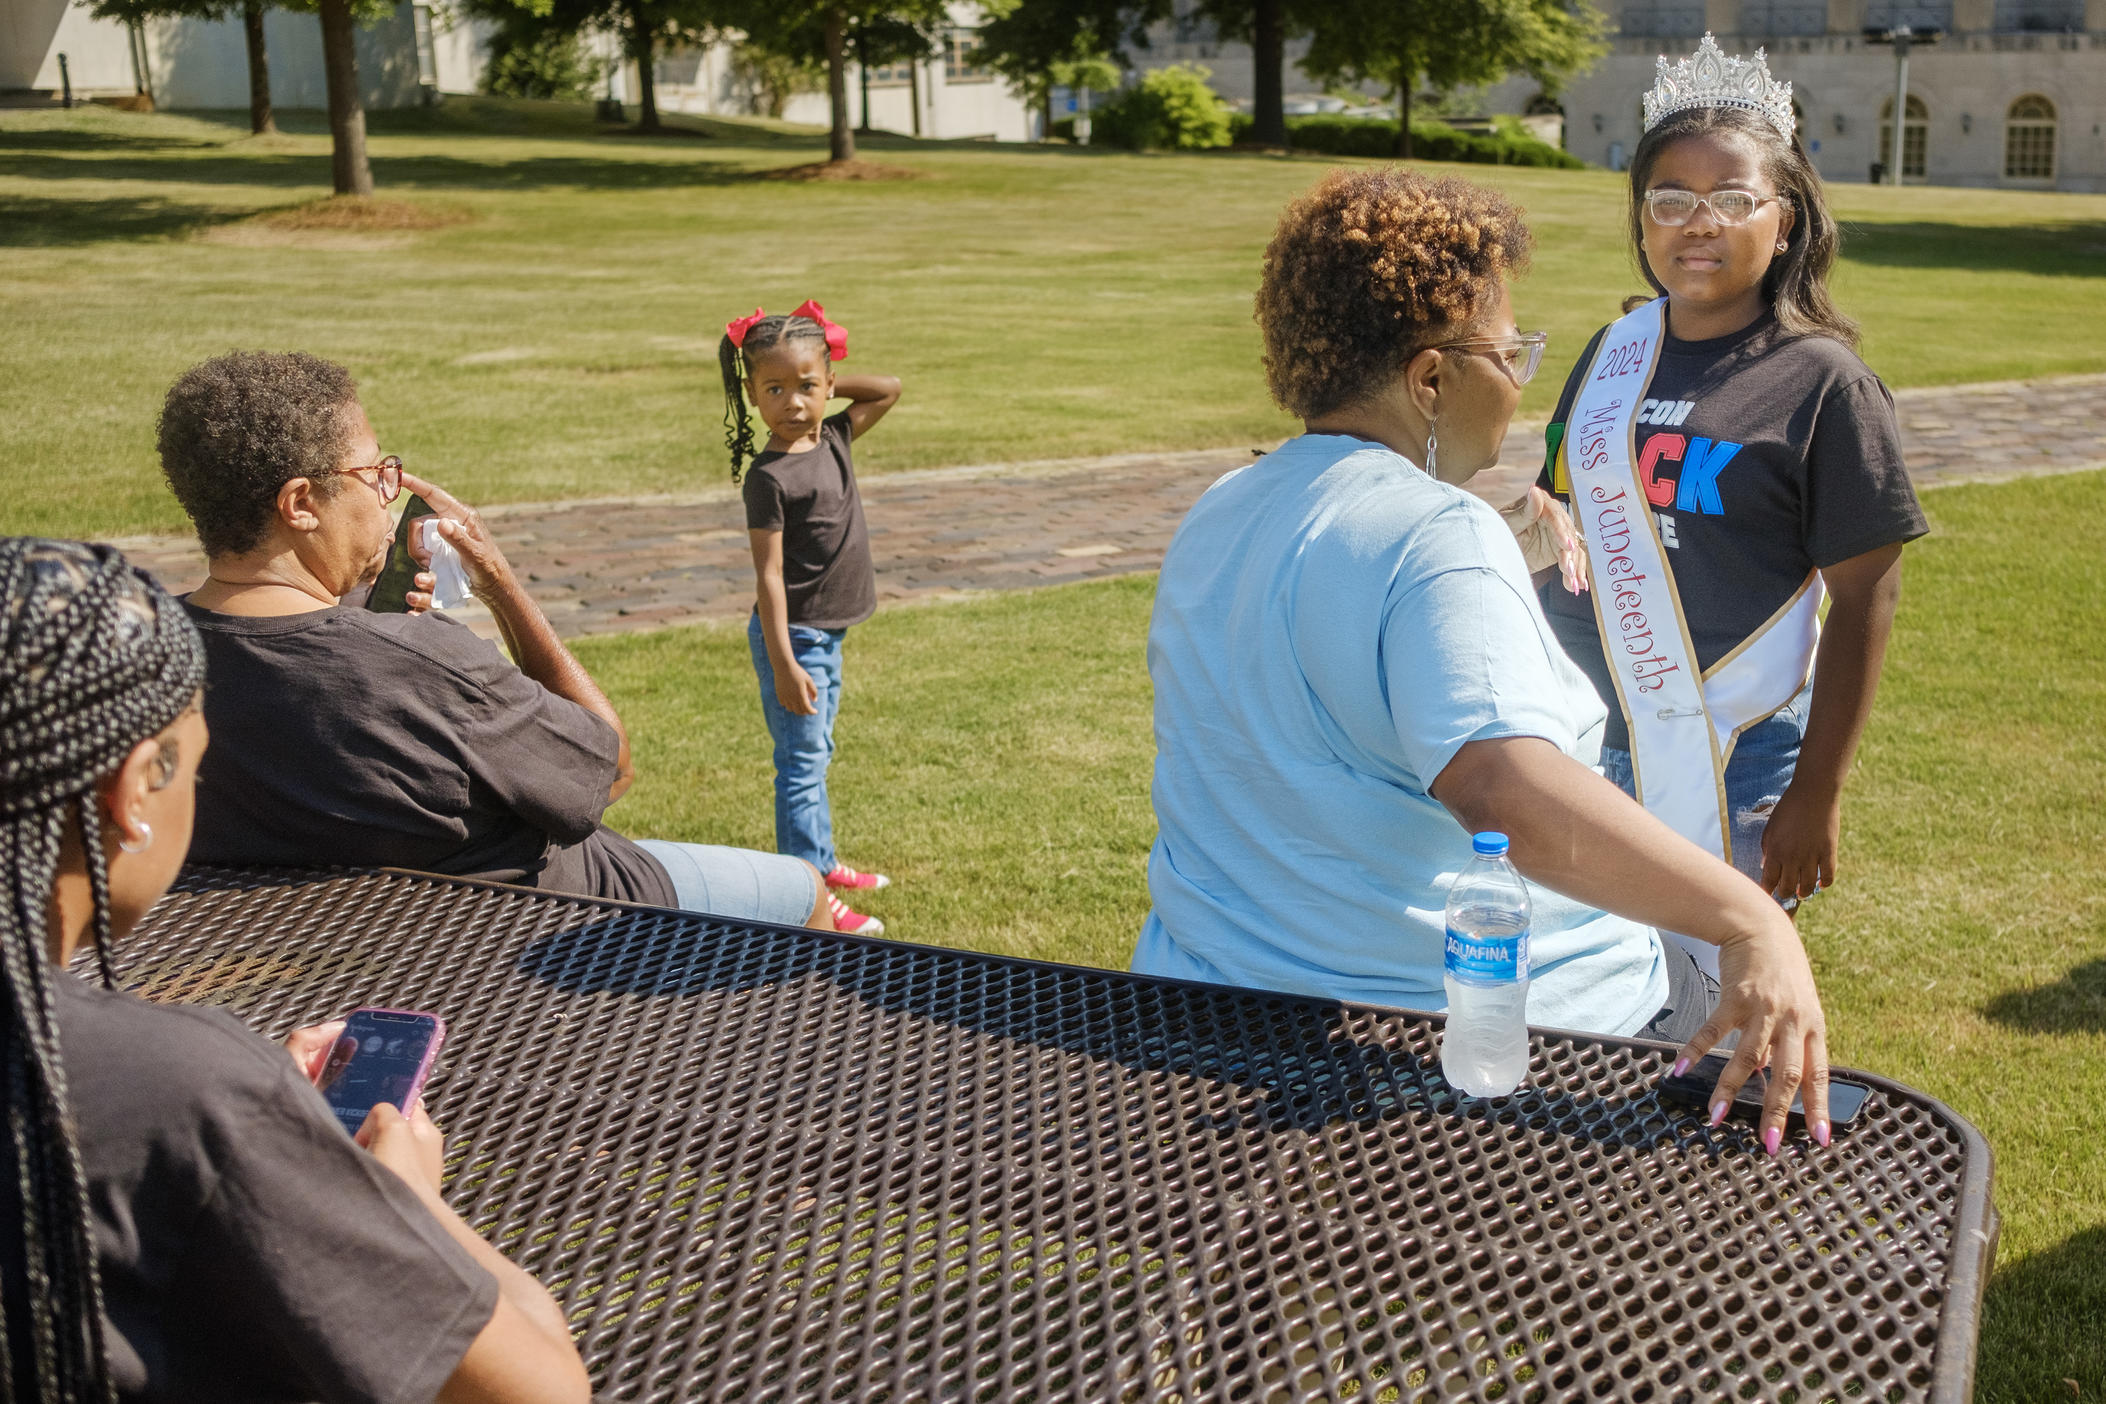 Erica Joy Scandrett, right, 11, gets a final straightening of her Miss Juneteenth sash and tiara from her mother Tiffany Scandrett before a ceremonial wreath laying as a part of Juneteenth observances in Macon on Thursday, June 13. Erica won her post in part through her speech about the role of the major theme in Macon’s Juneteenth observances this year, Black Girl Magic, in her life. 